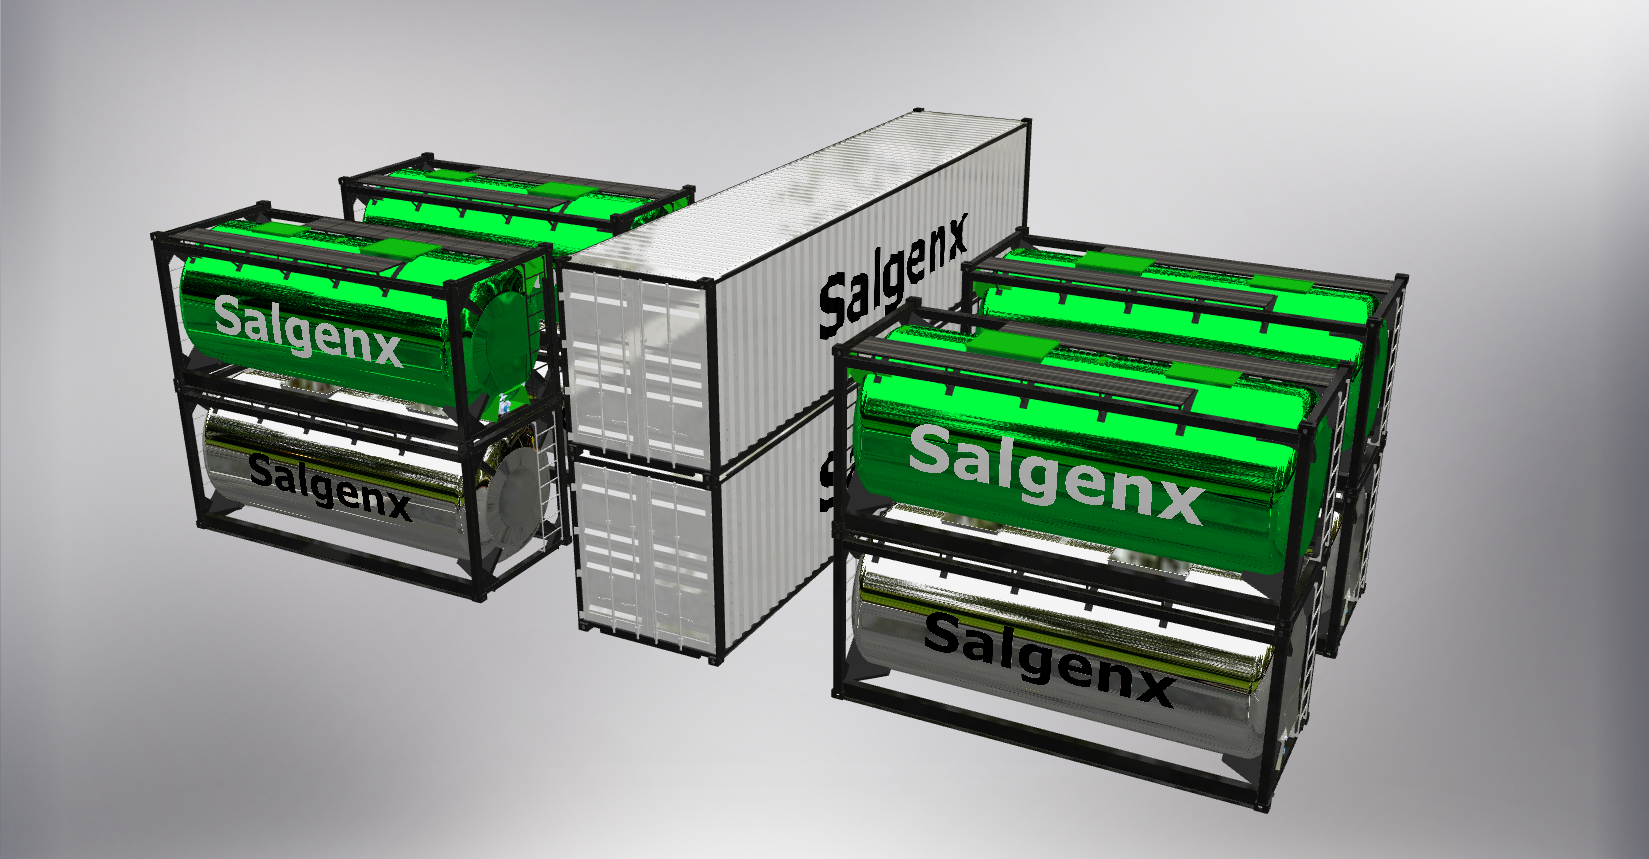 20221219-salgenx-s12mw-Right-Side-perspective